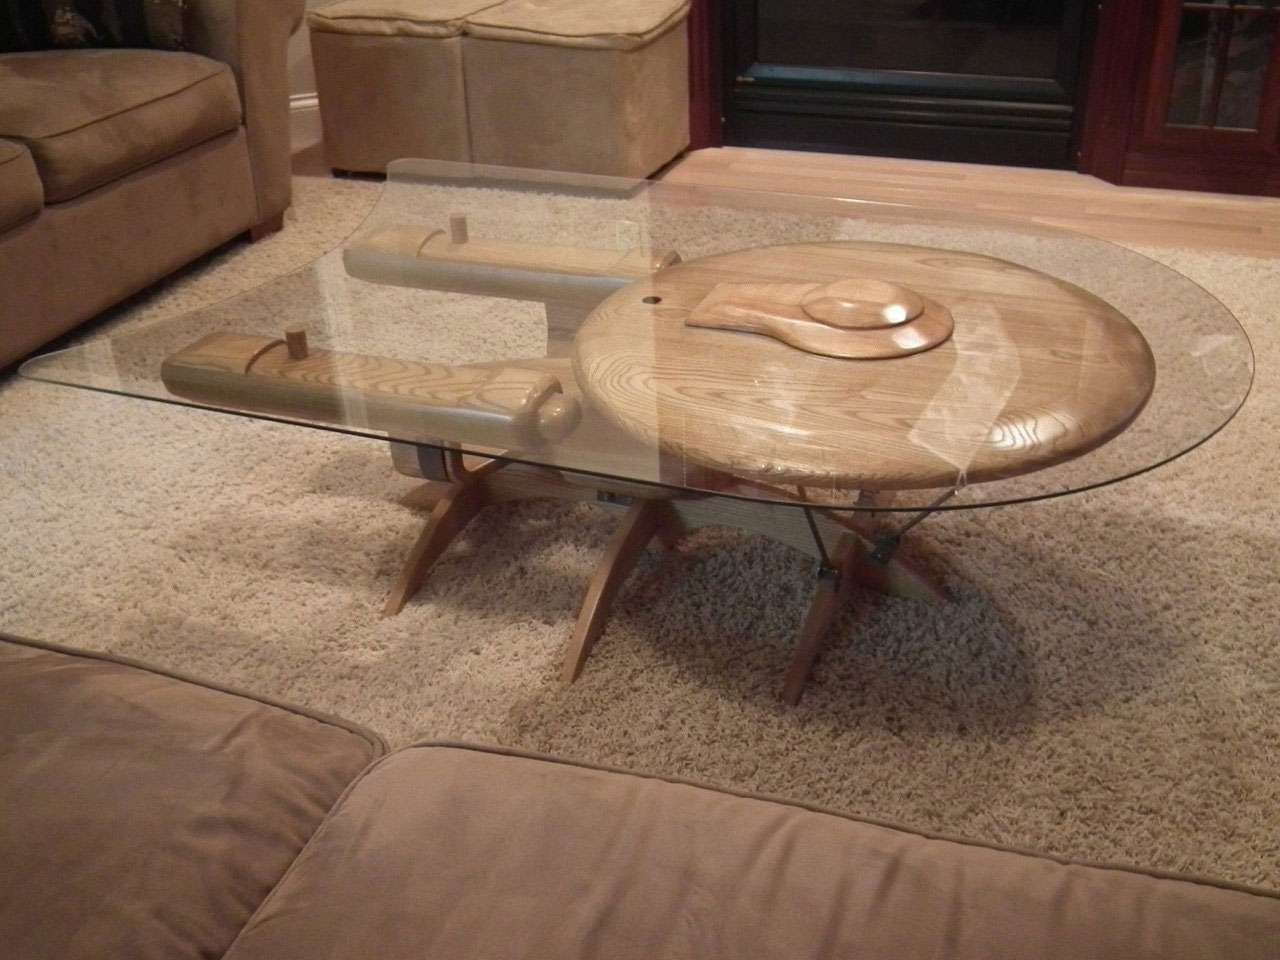 Star Trek Uss Enterprise Ncc 1701 C Coffee Table – The Green Head With Regard To Well Liked C Coffee Tables (View 17 of 20)